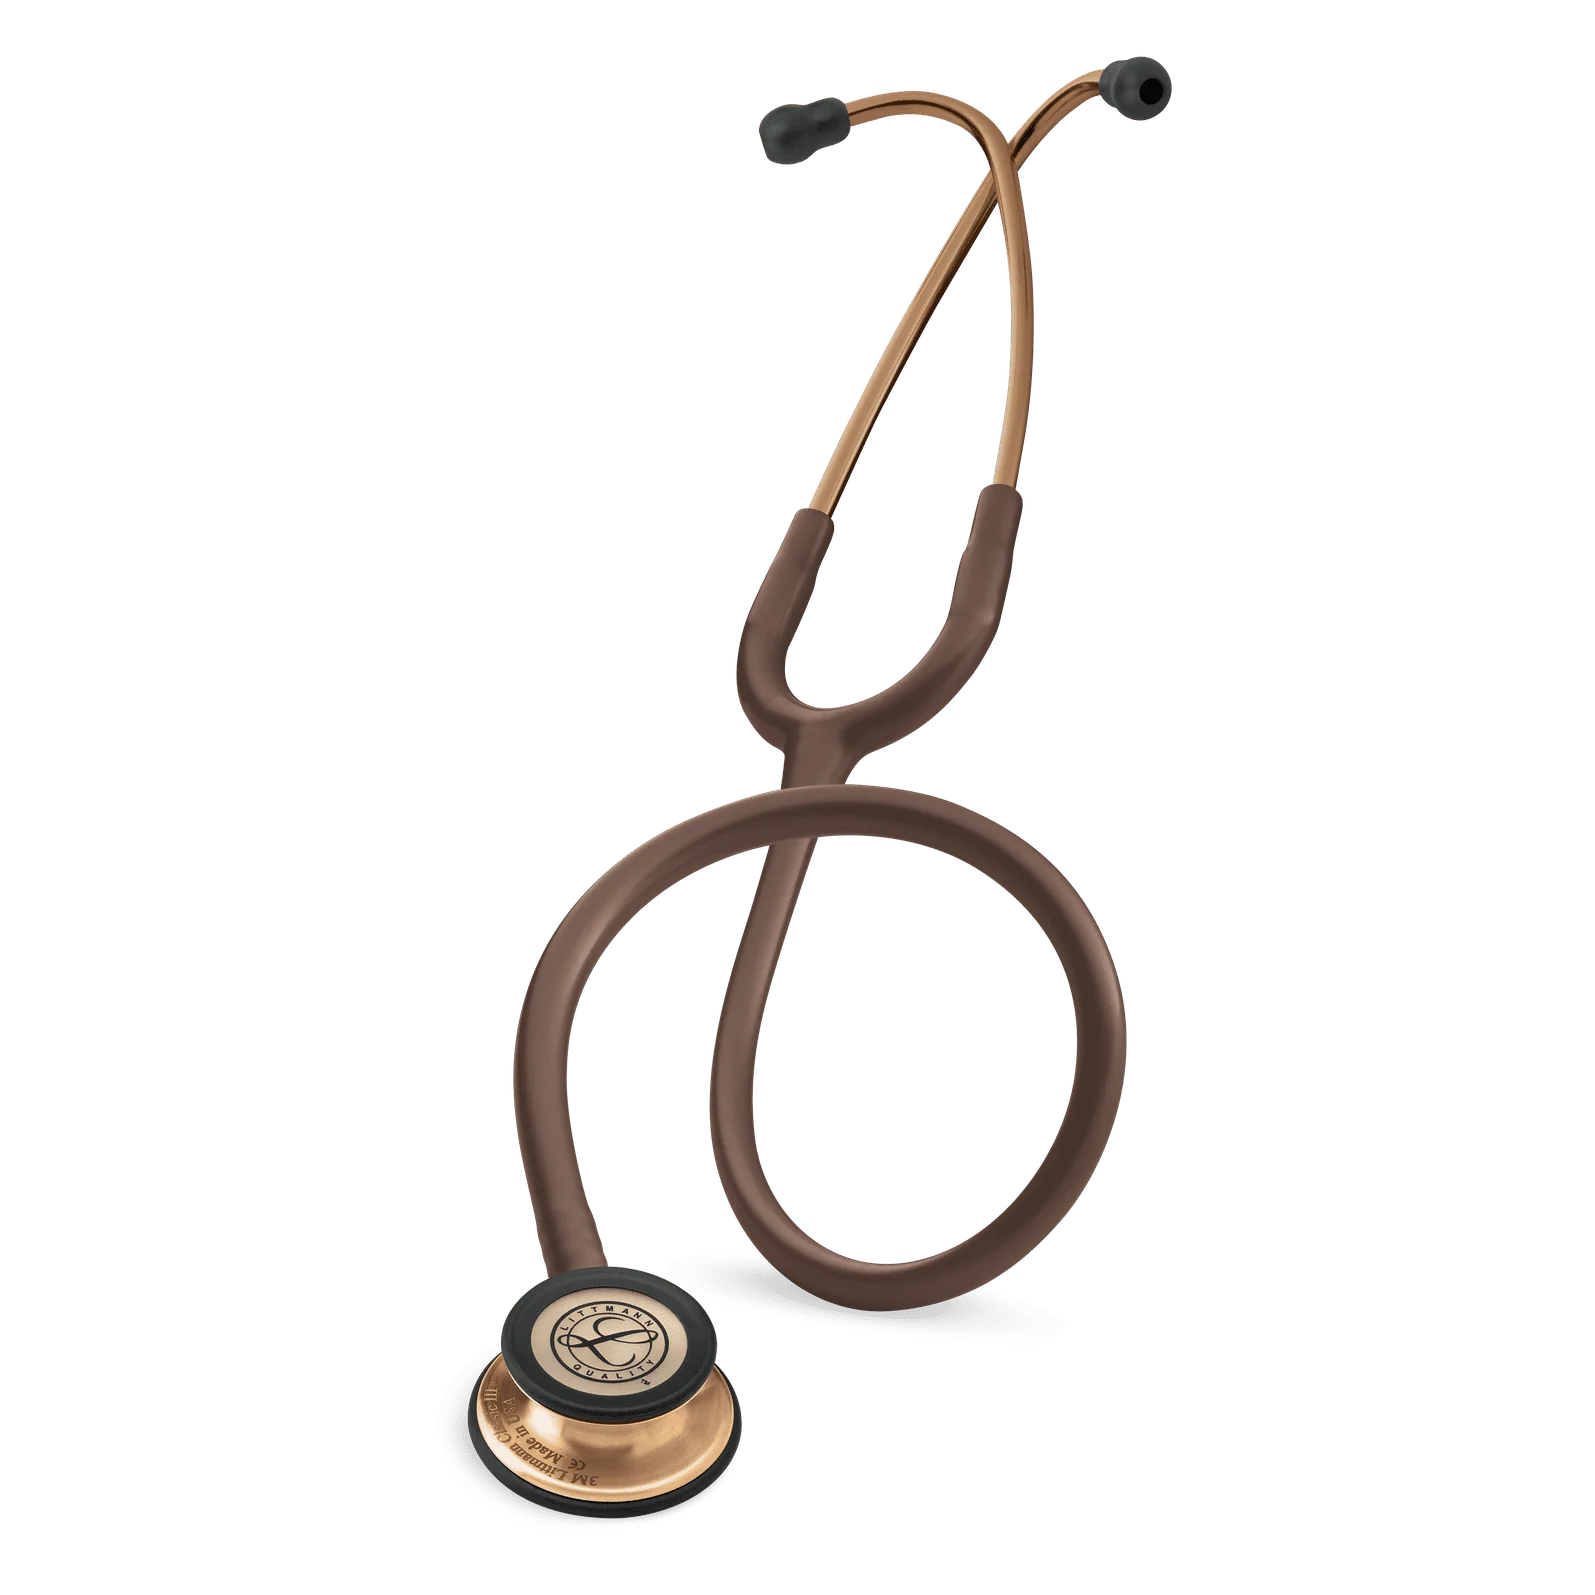 3M Littmann Classic III Stethoscope Special Edition Copper Chocolate Gold (5809) - Special Copper Chocolate with Golden Chest Piece - Littmann Stethoscopes in Pakistan